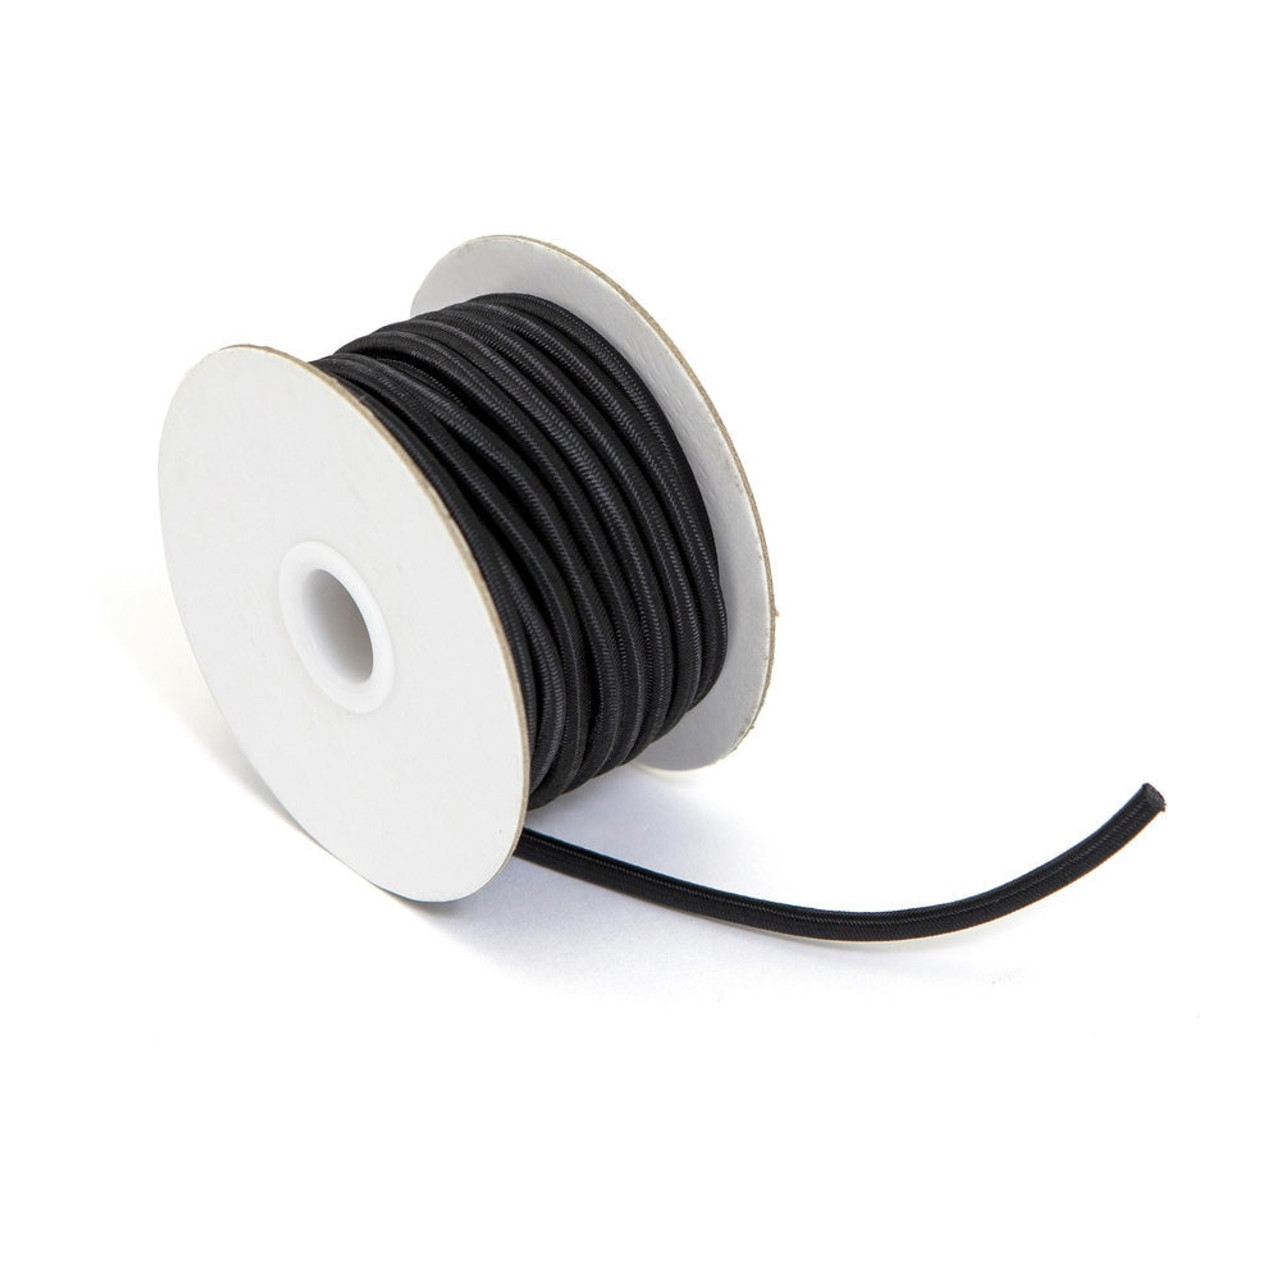 1 4 inch black bungee cord